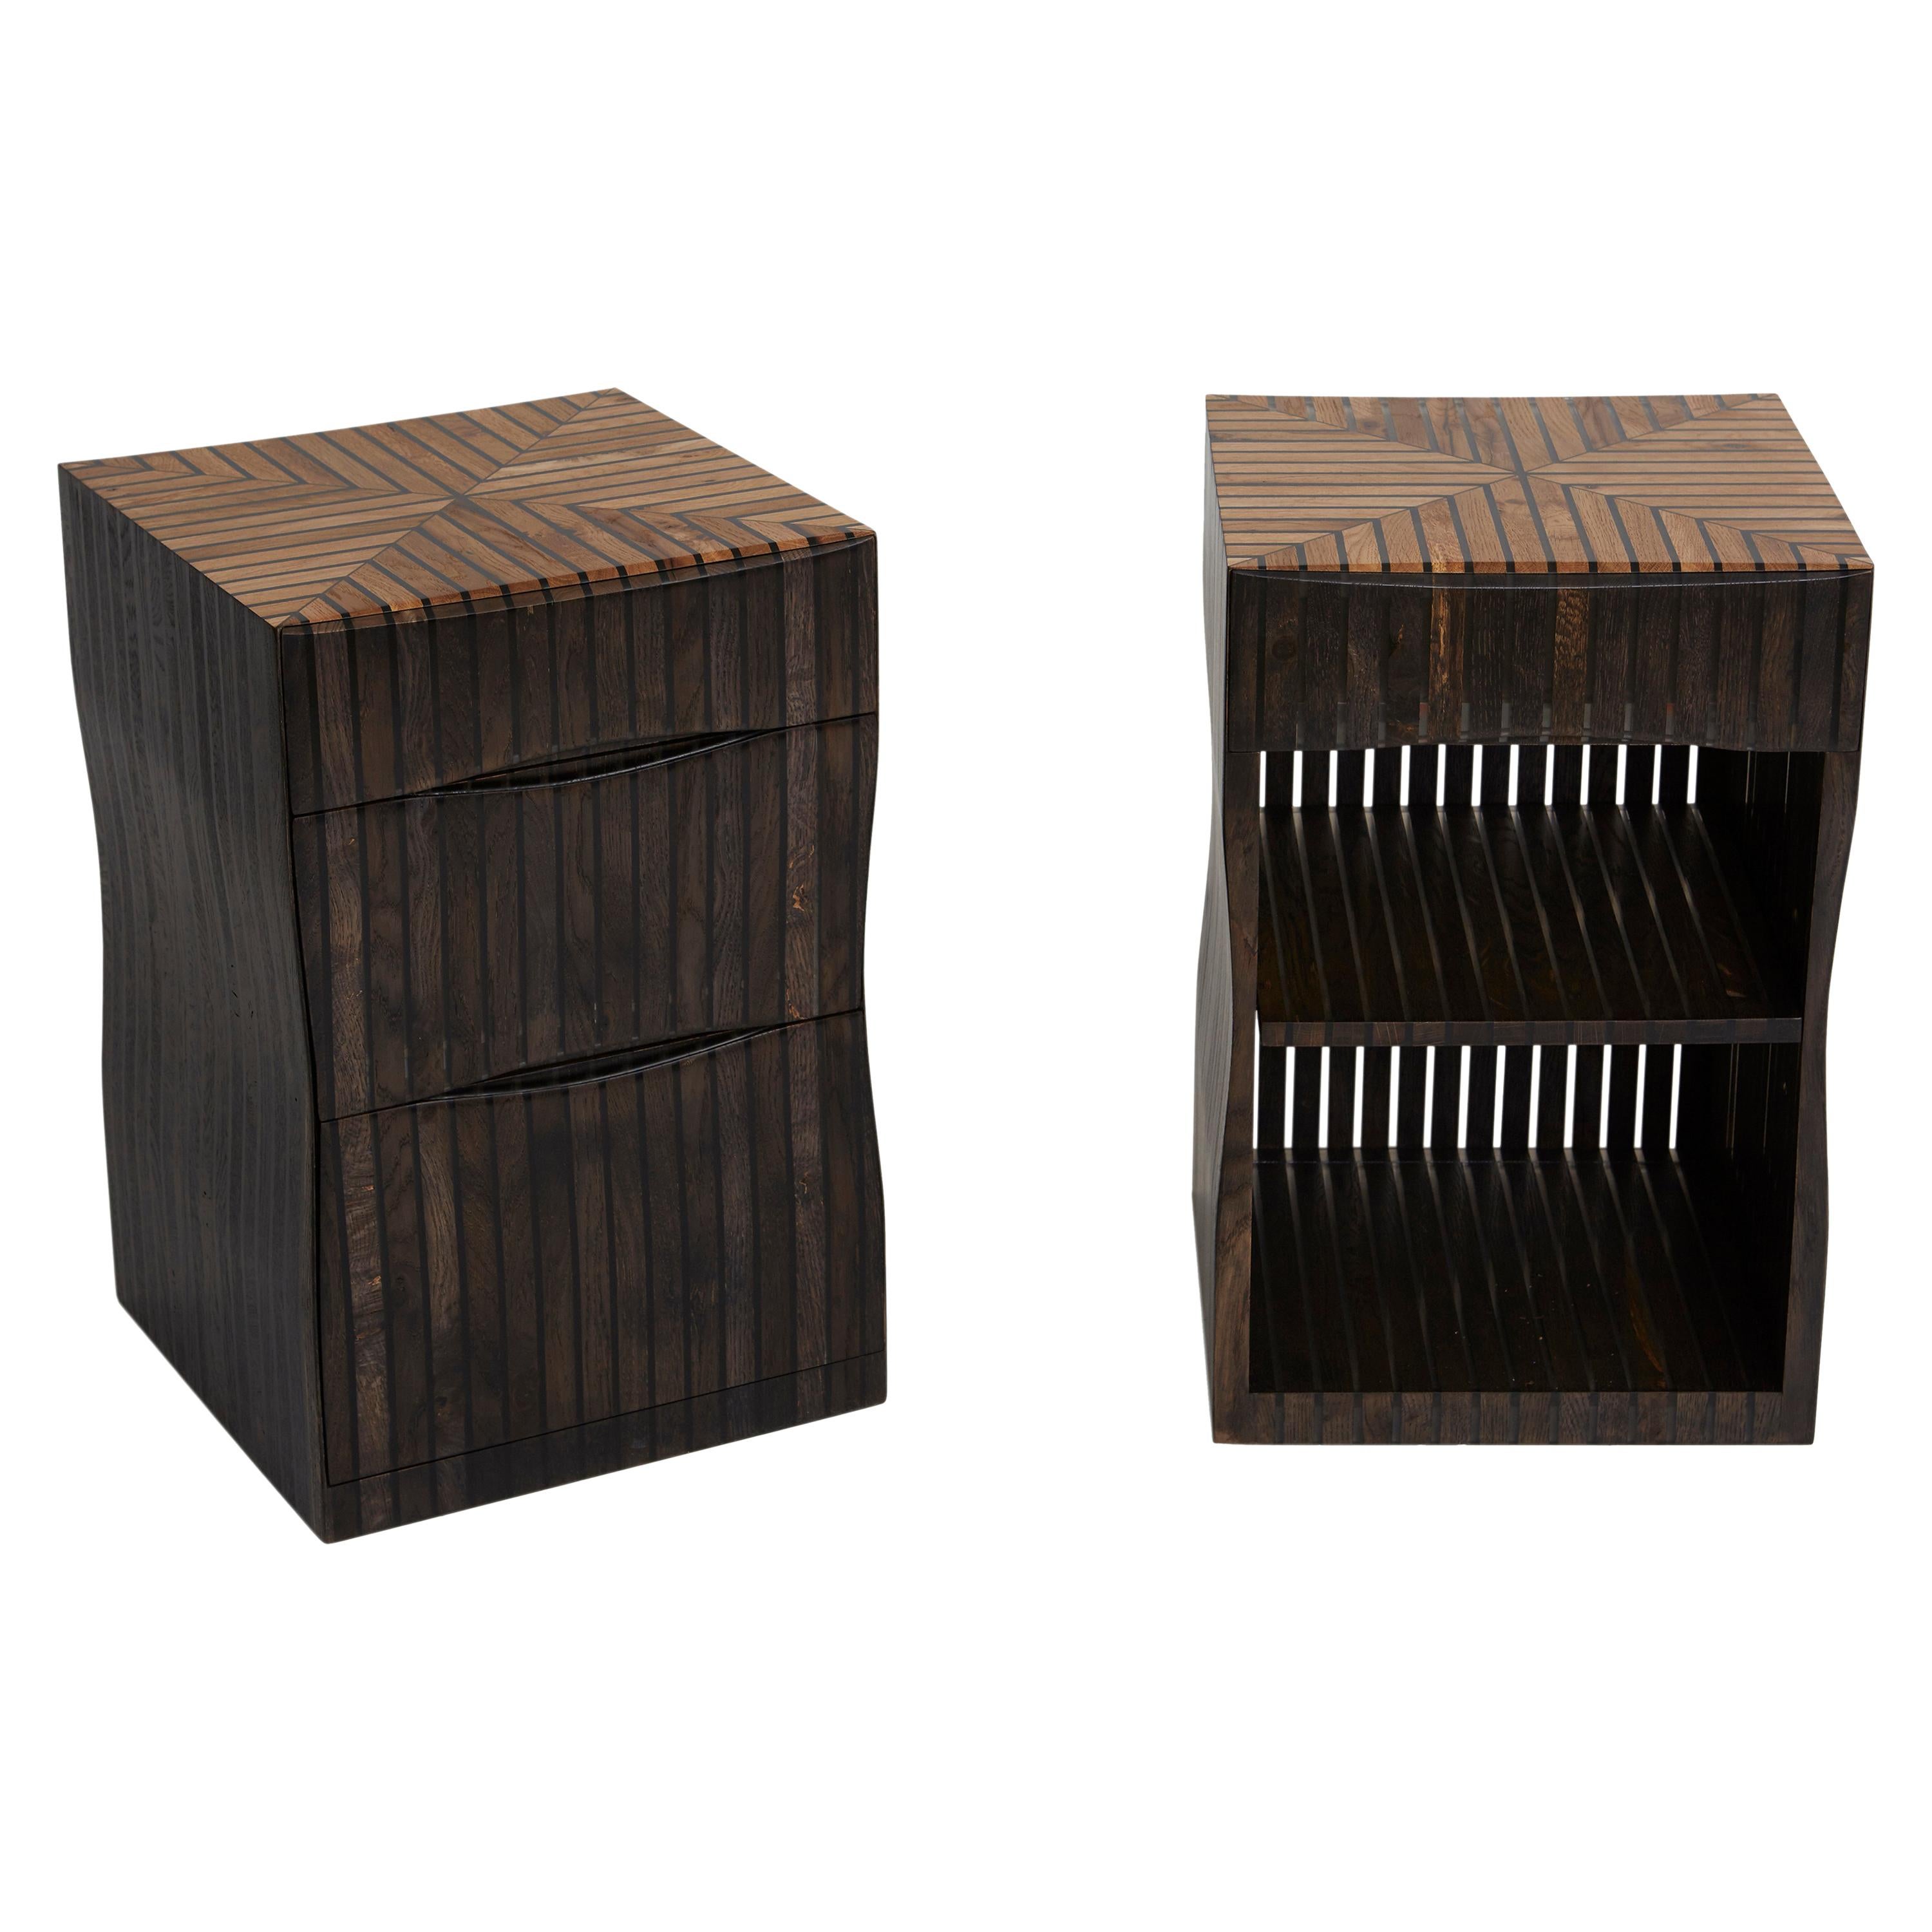 A pair of side tables in oak and clear ebony tinted resin. by Jonathan Field